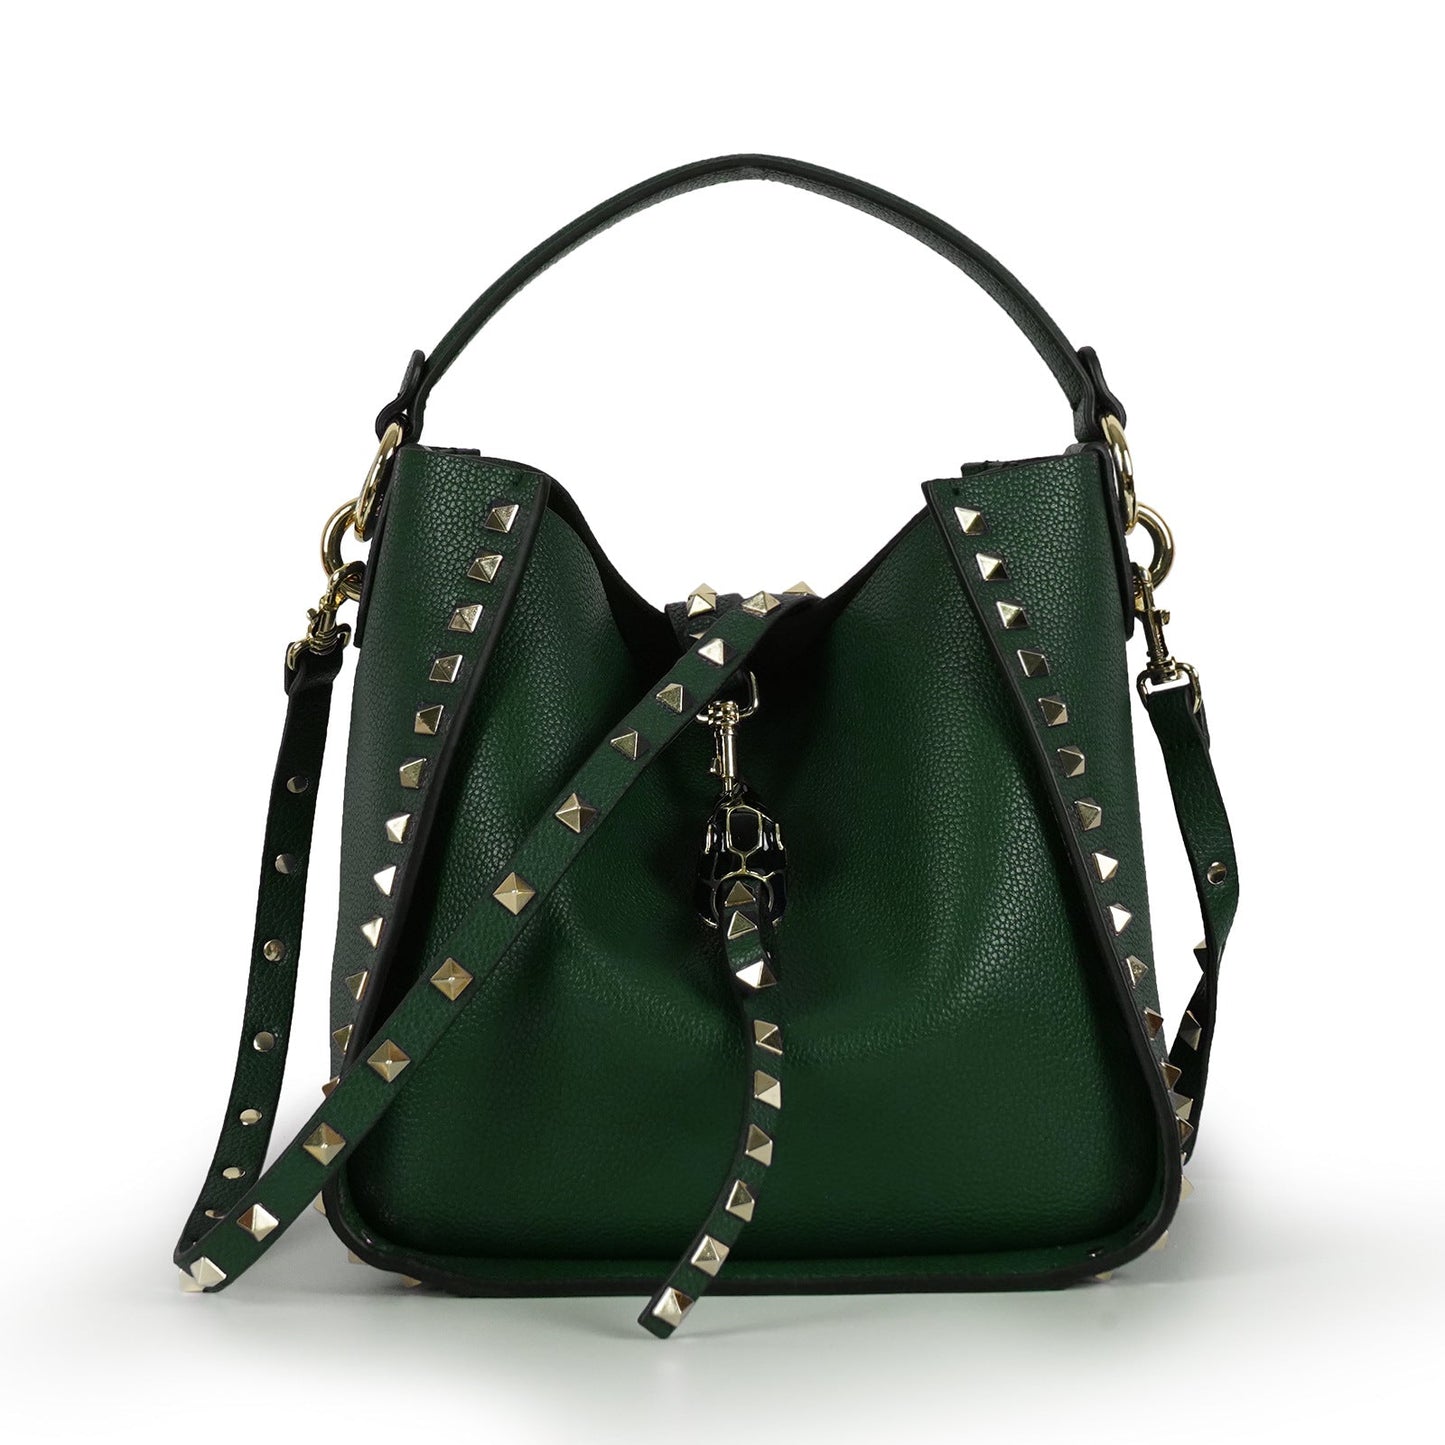 Classic Tote Handbag with Eye-catching Rivet Accents woyaza